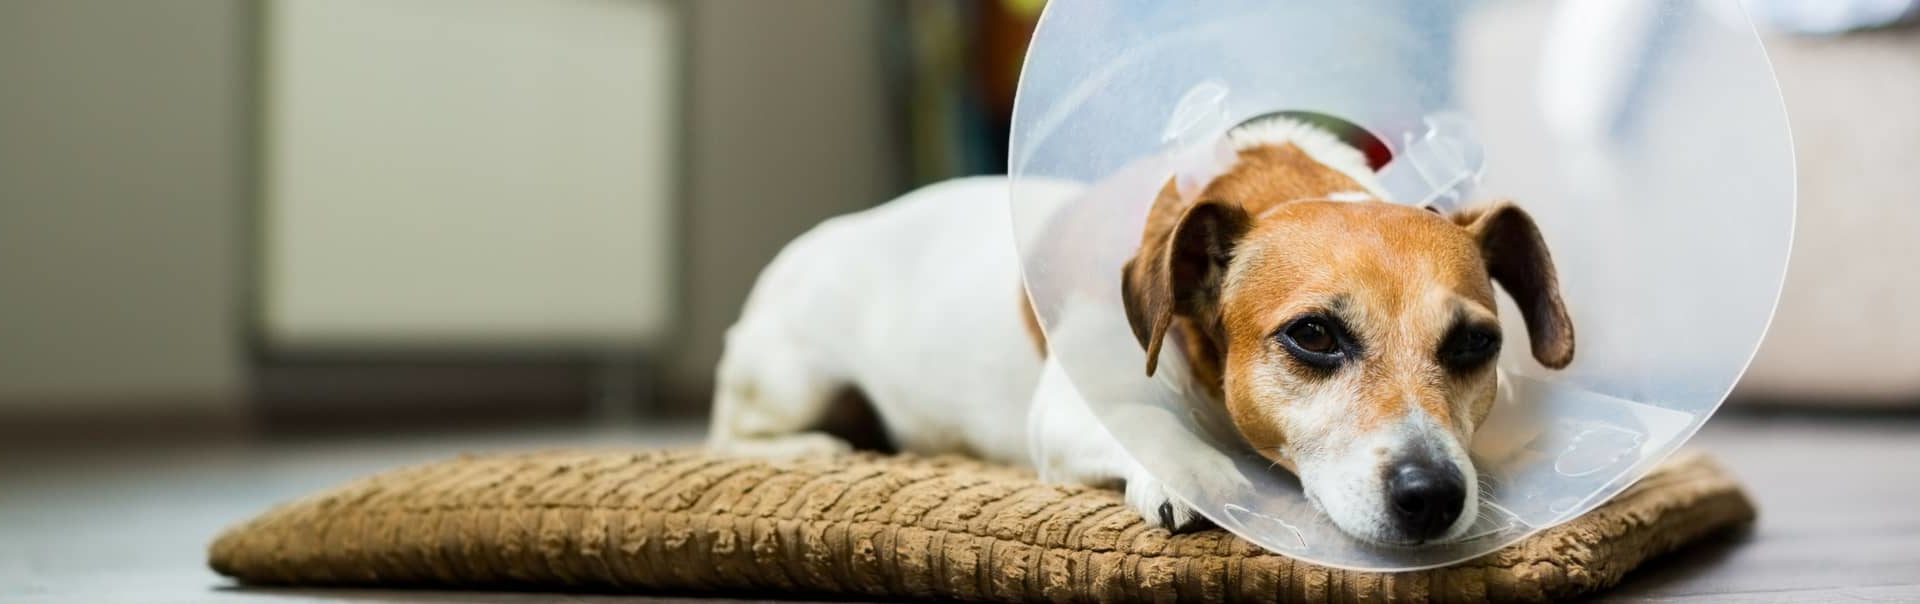 Jack Russell with a cone